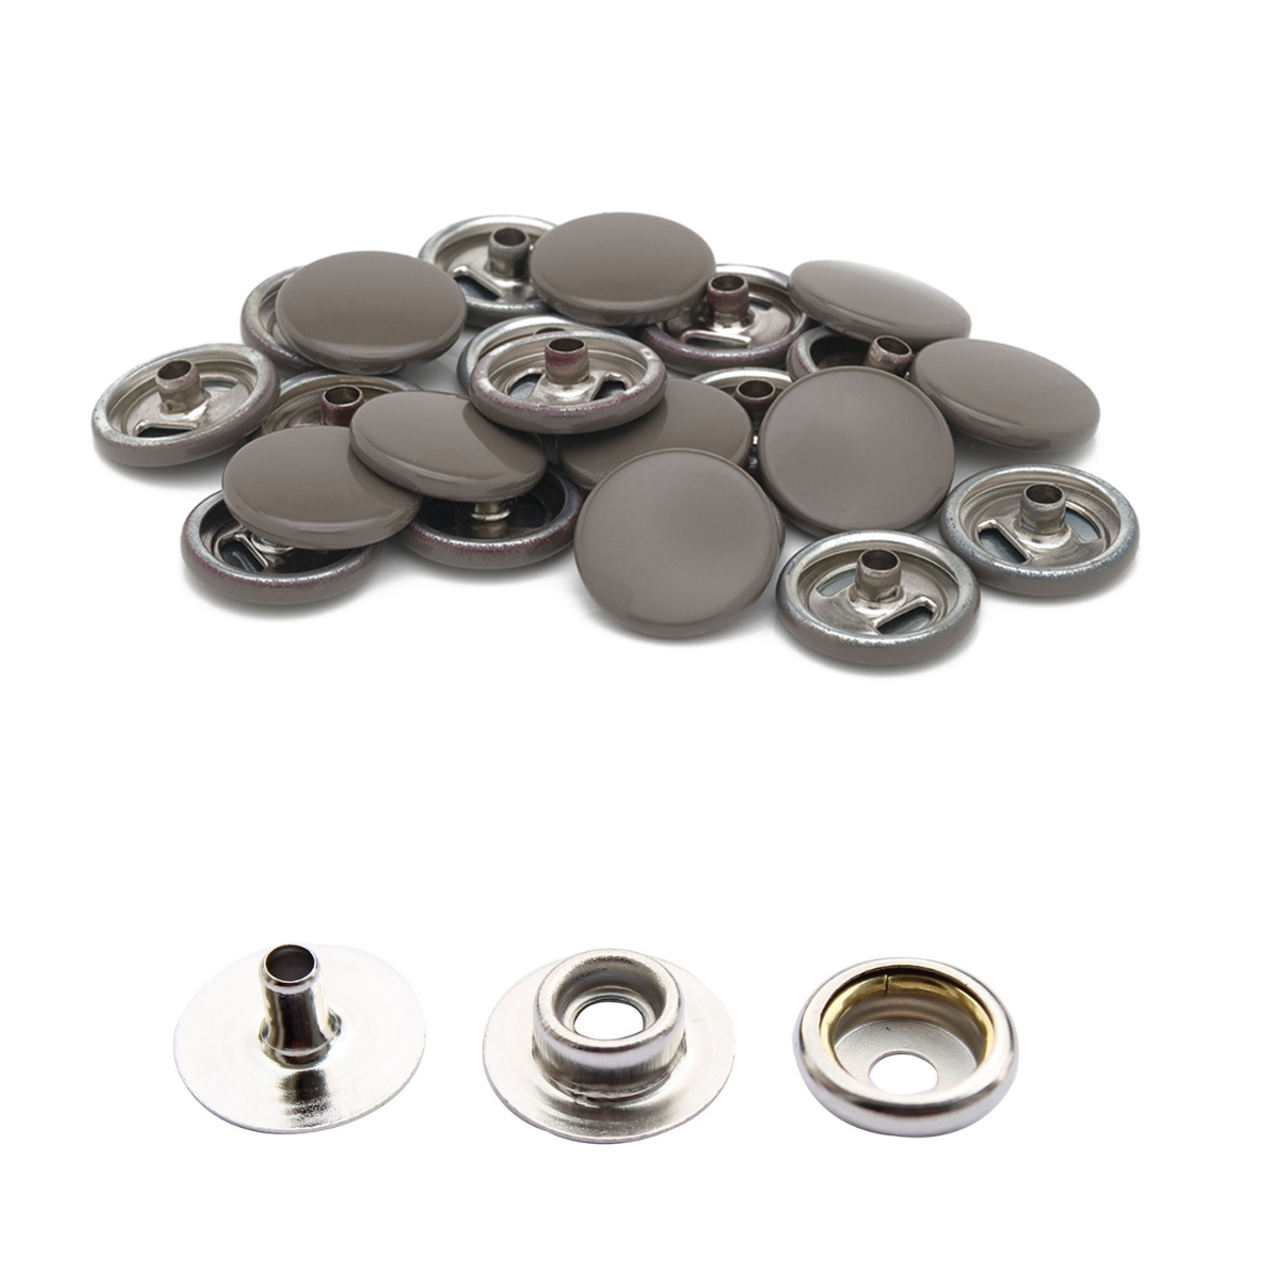 15mm 4-Part Press Studs with Colour Caps and Small Silver Components- 10pcs